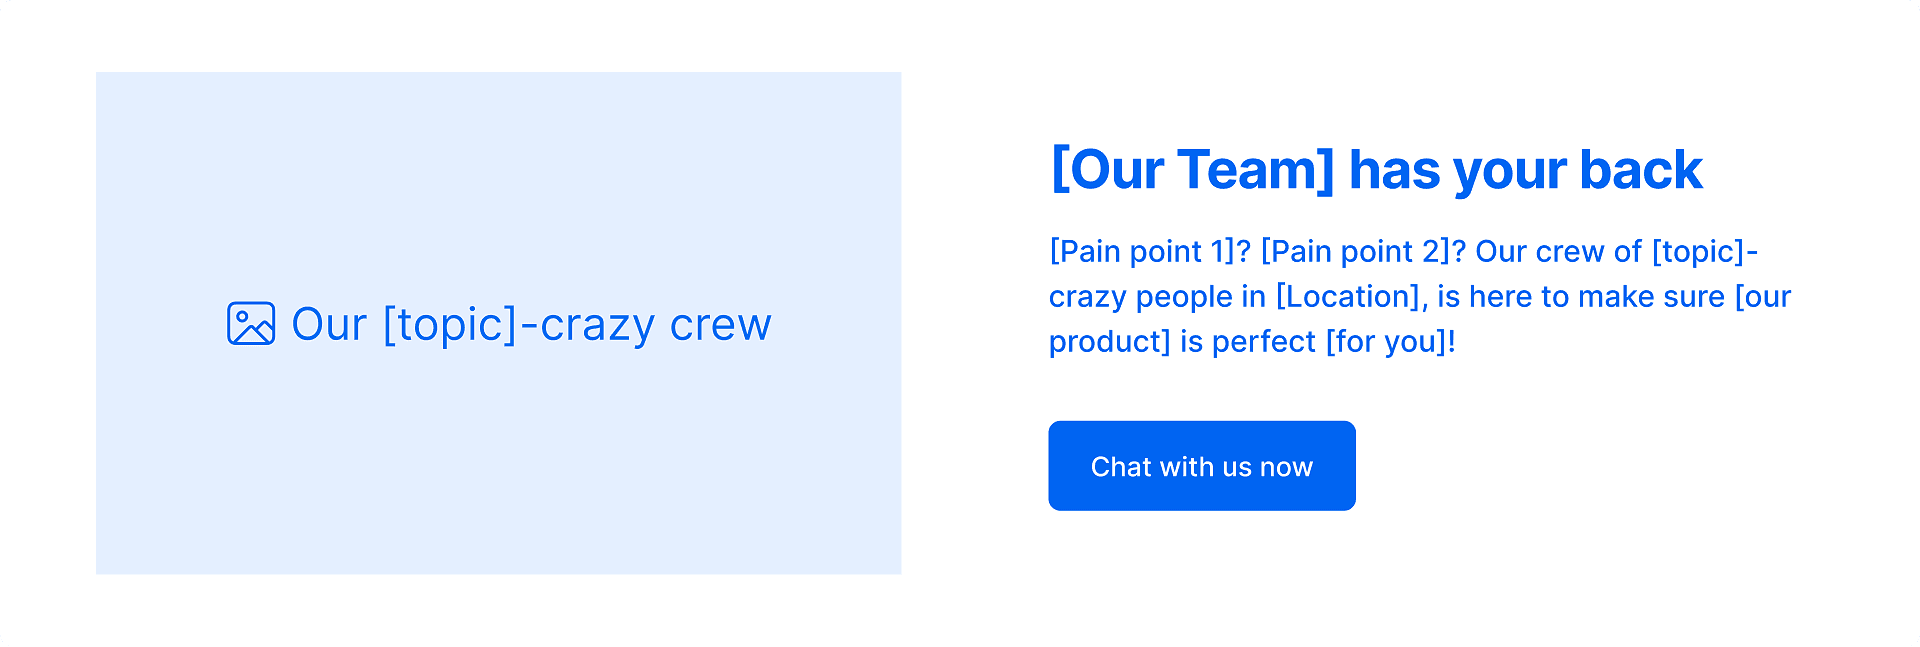 Blueprint of our team has your back